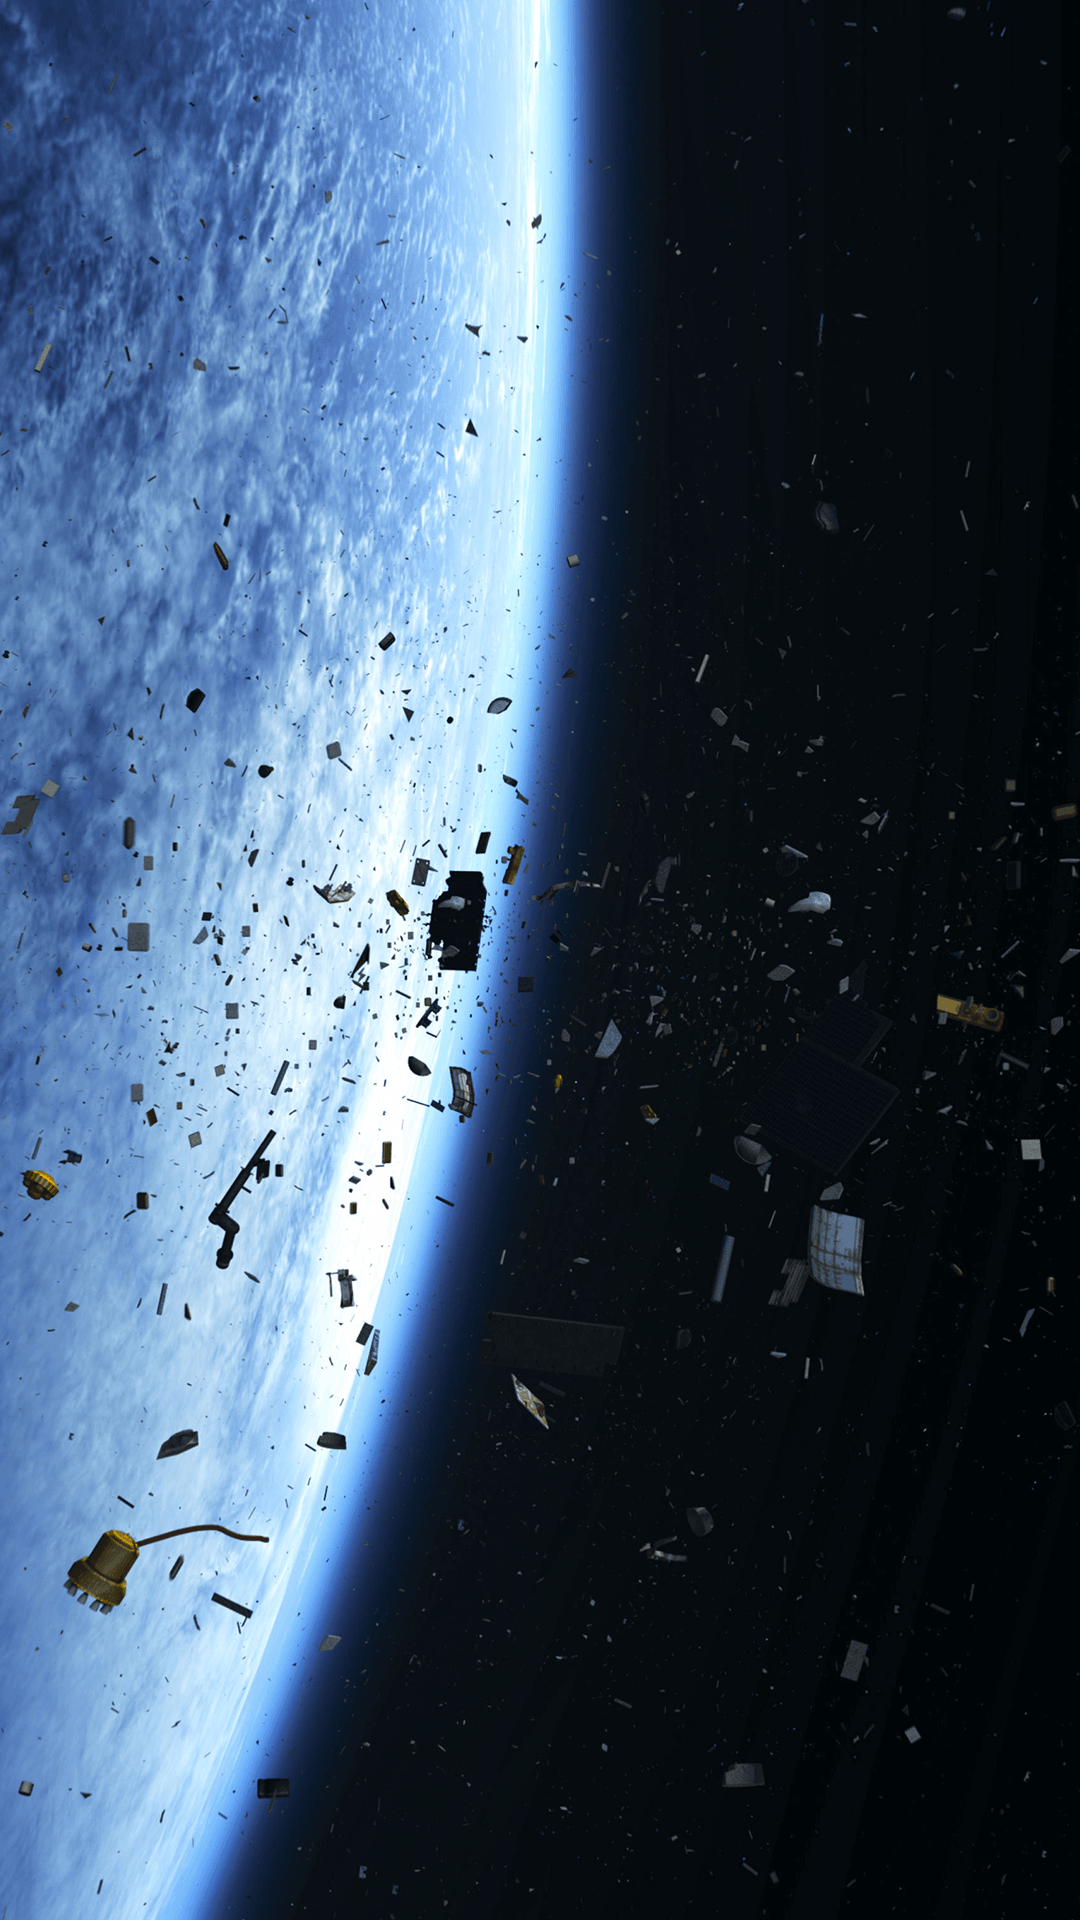 Free HD Space Debris iPhone Wallpapers For Download ...0527